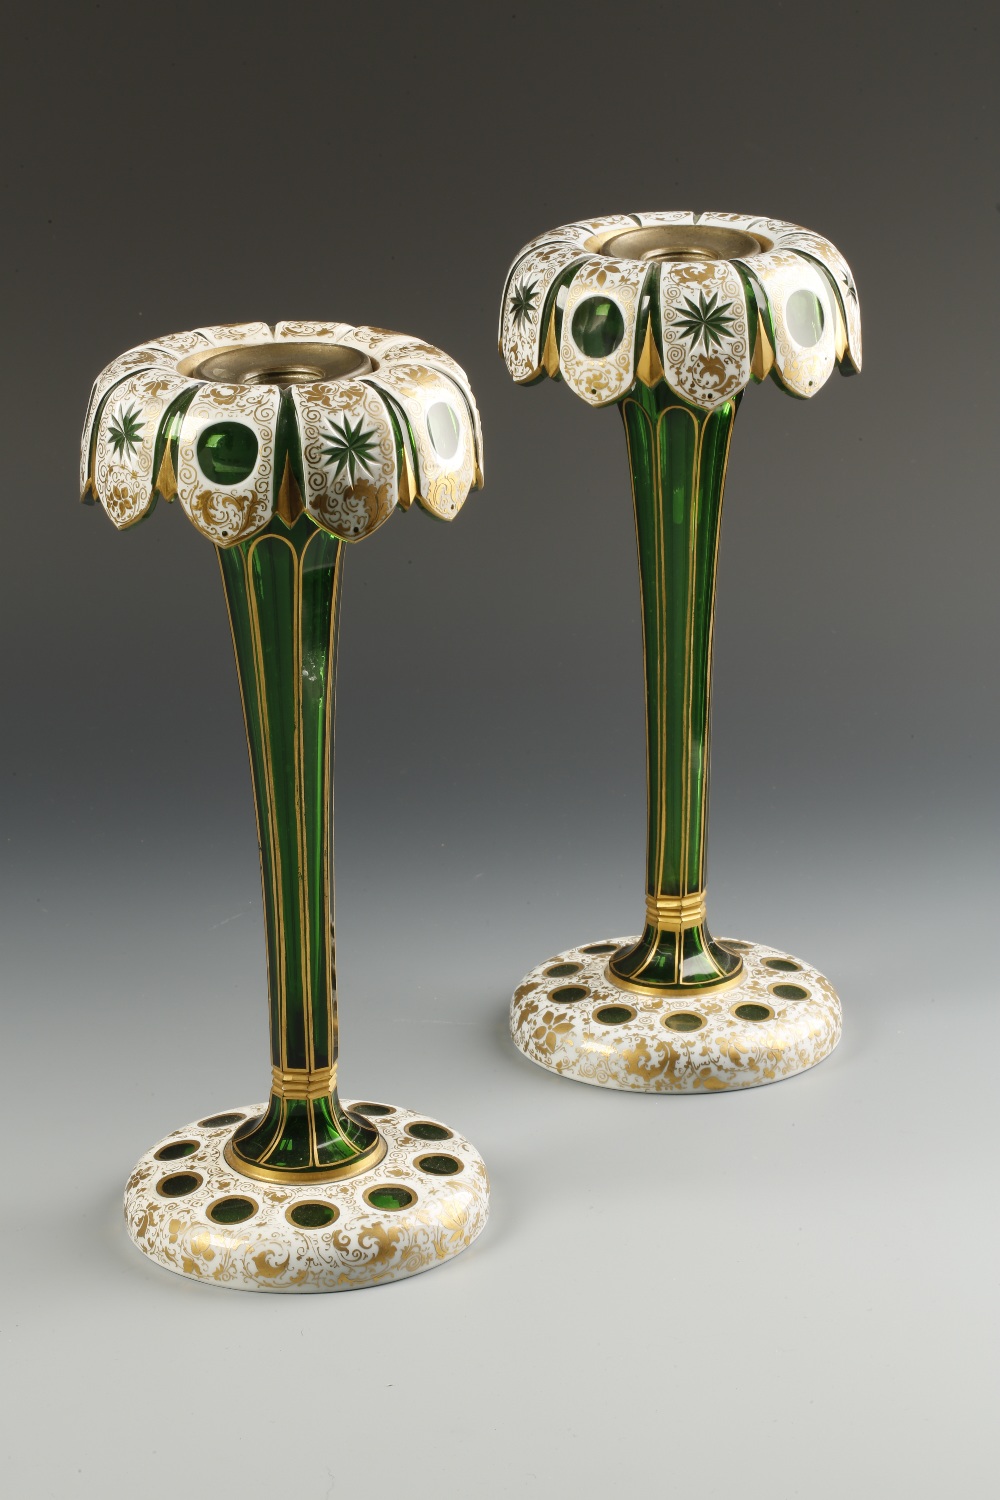 A PAIR OF VICTORIAN BOHEMIAN-STYLE LUSTRES, each of vase-shaped form with overhanging tops with